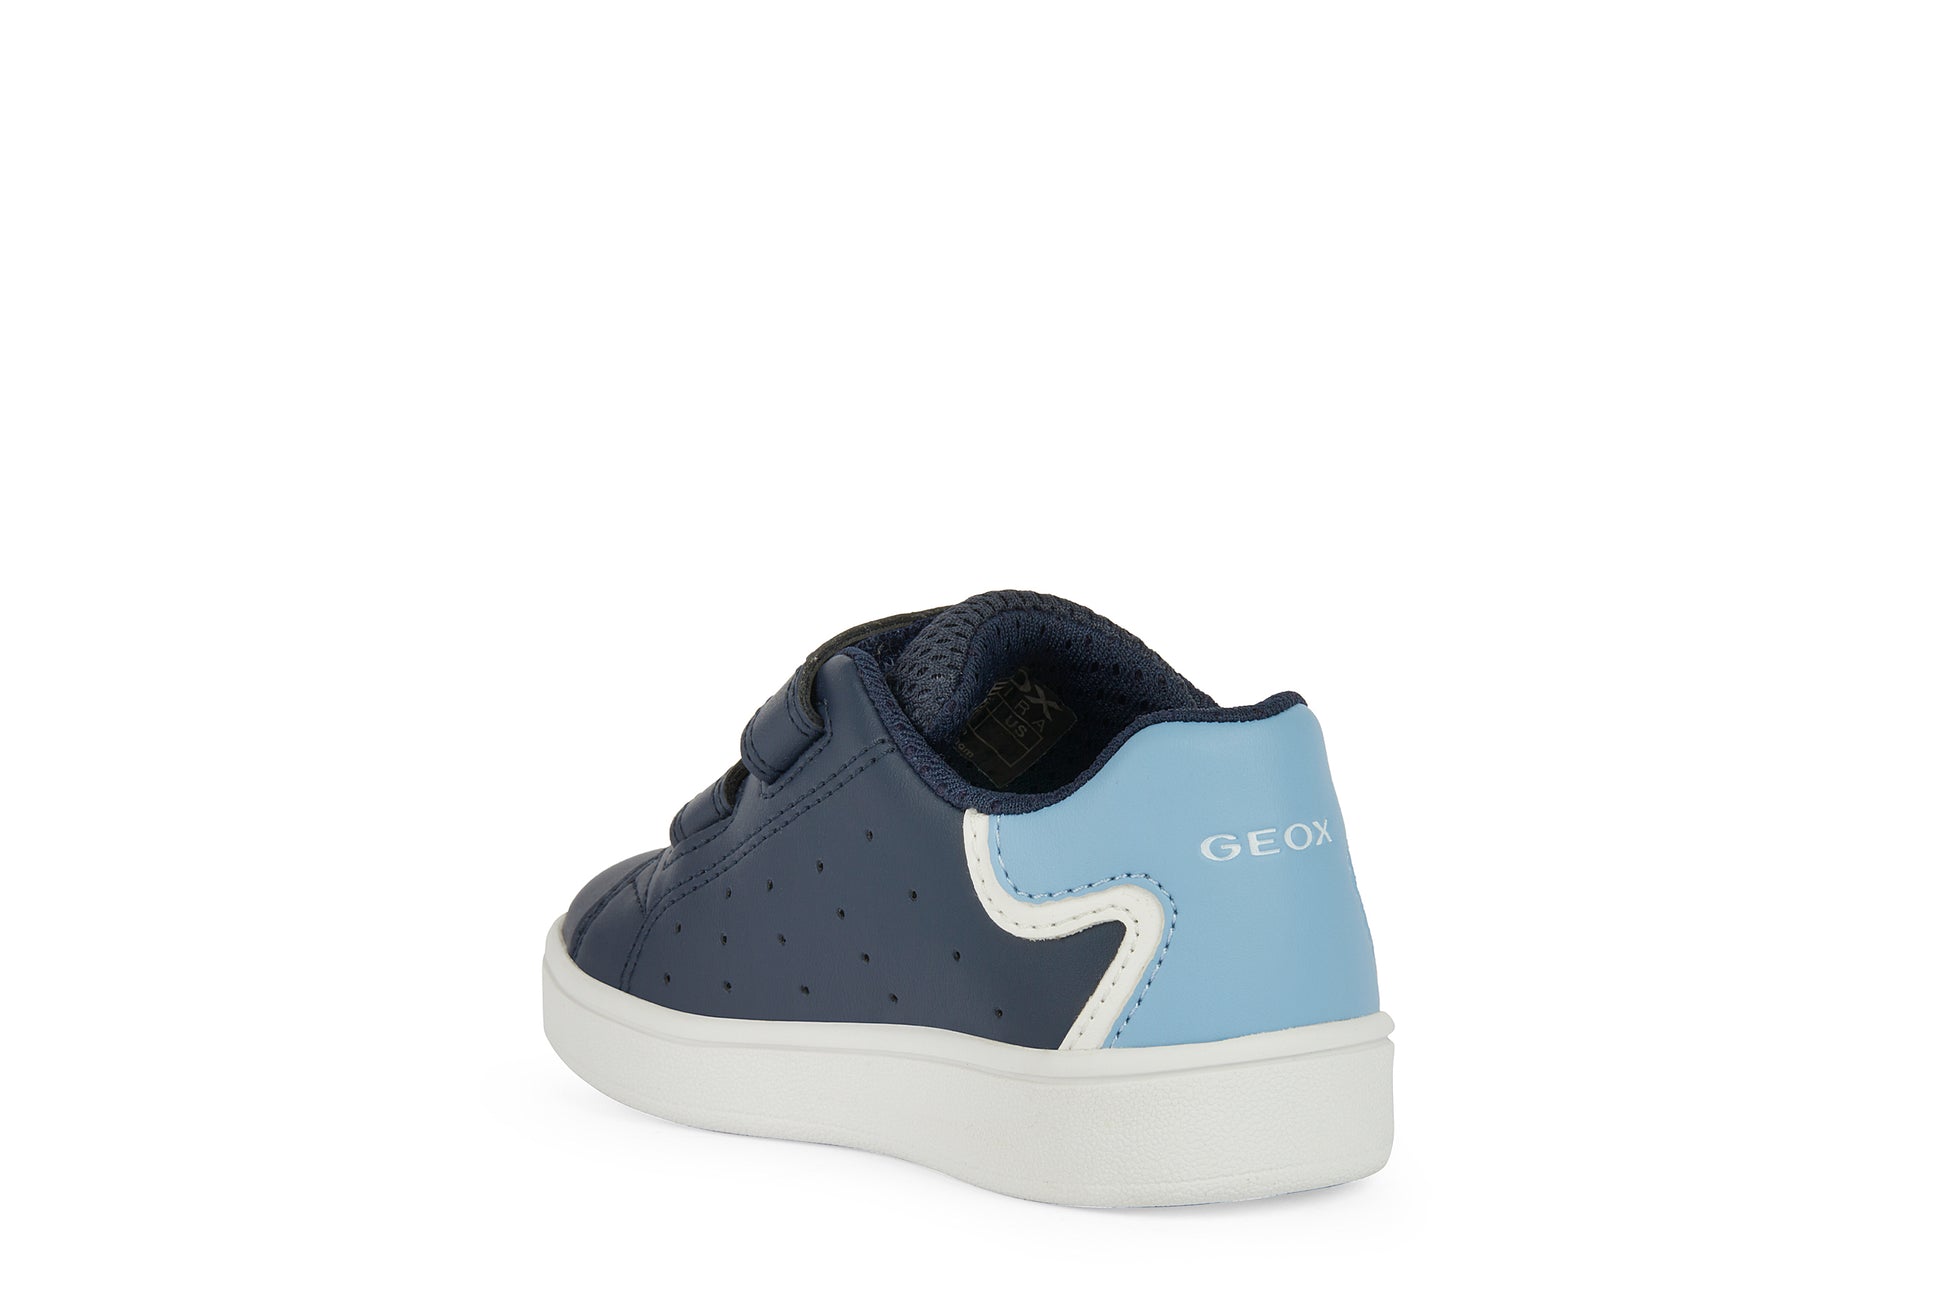 A boys casual shoe by Geox, style B Eclyper, in navy, light blue and white with double velcro fastening. Angled left side view.